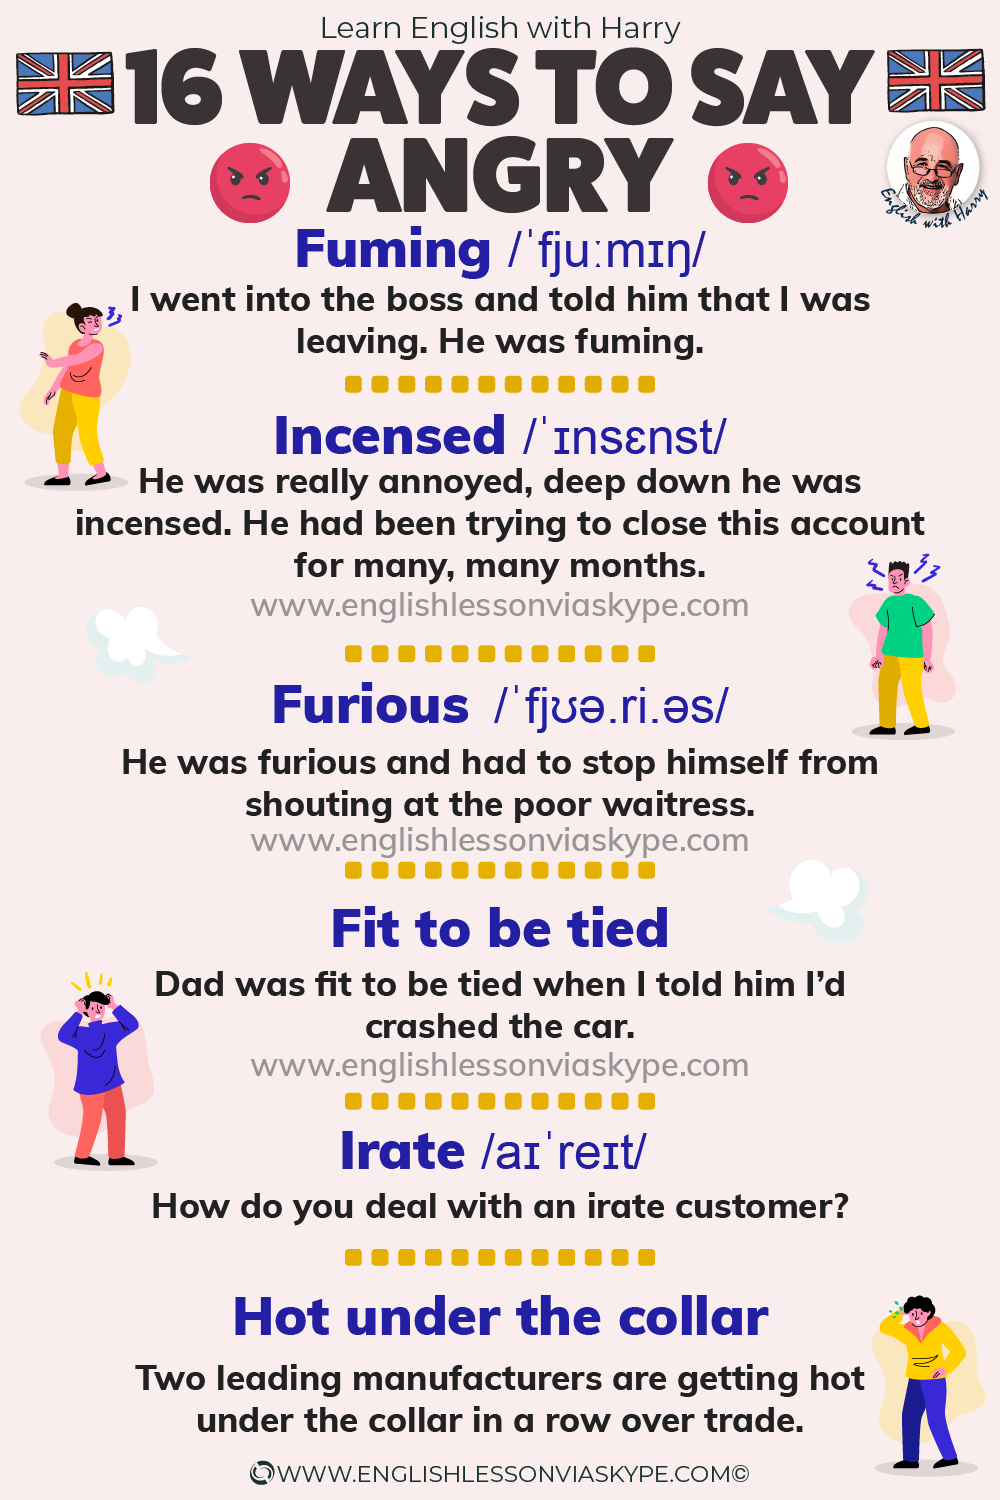 16 Better ways to say angry in English. Boost your vocabulary. Improve English to advanced level with www.englishlessonviaskype.com #learnenglish #englishlessons #EnglishTeacher #vocabulary #ingles #อังกฤษ #английский #aprenderingles #english #cursodeingles #учианглийский #vocabulário #dicasdeingles #learningenglish #ingilizce #englishgrammar #englishvocabulary #ielts #idiomas